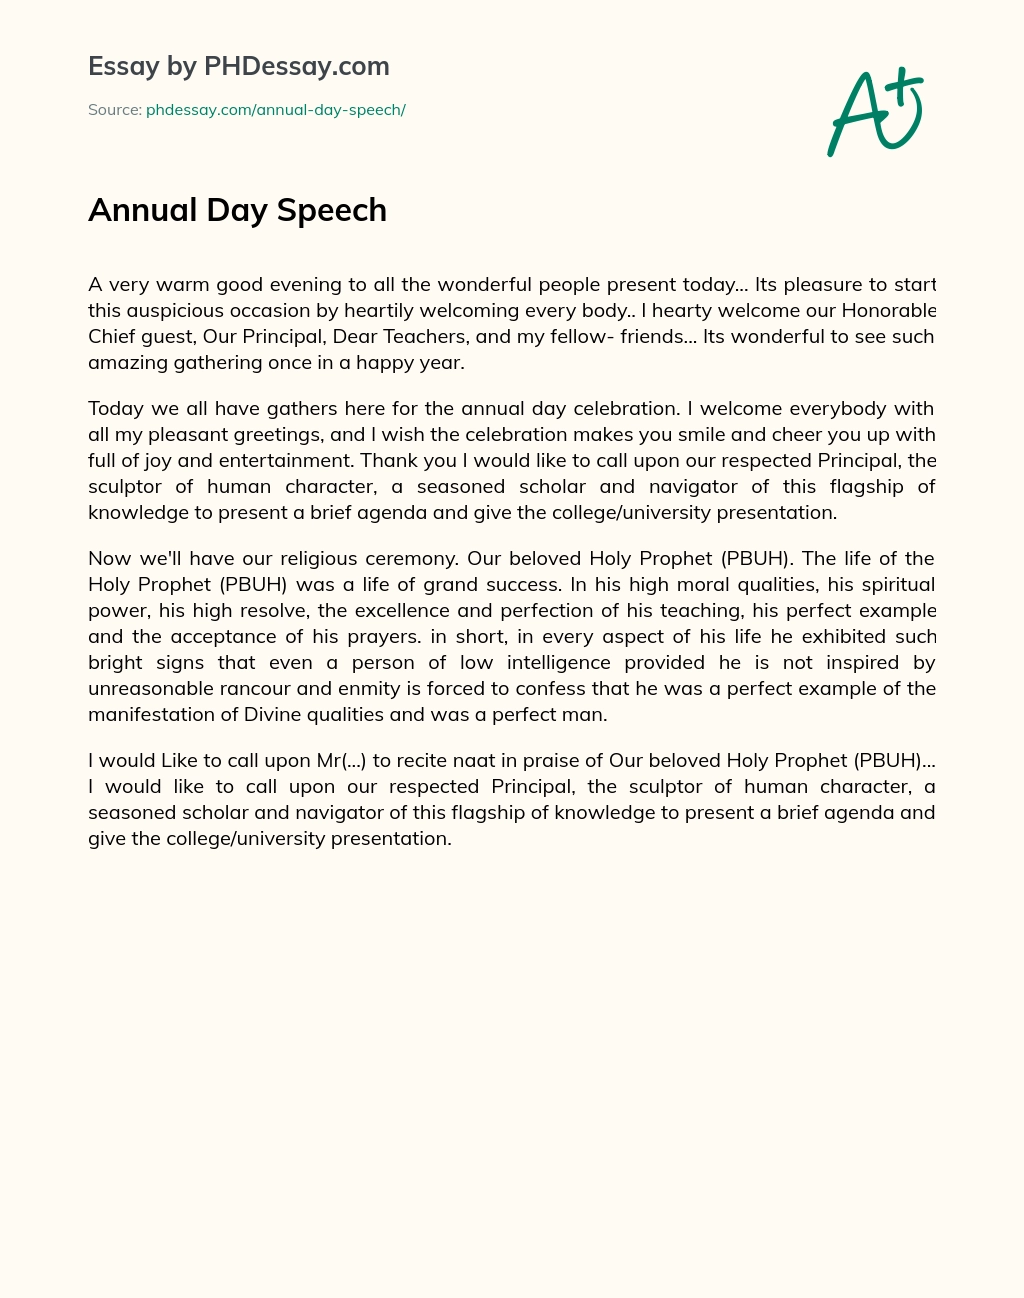 welcome speech for annual day celebration